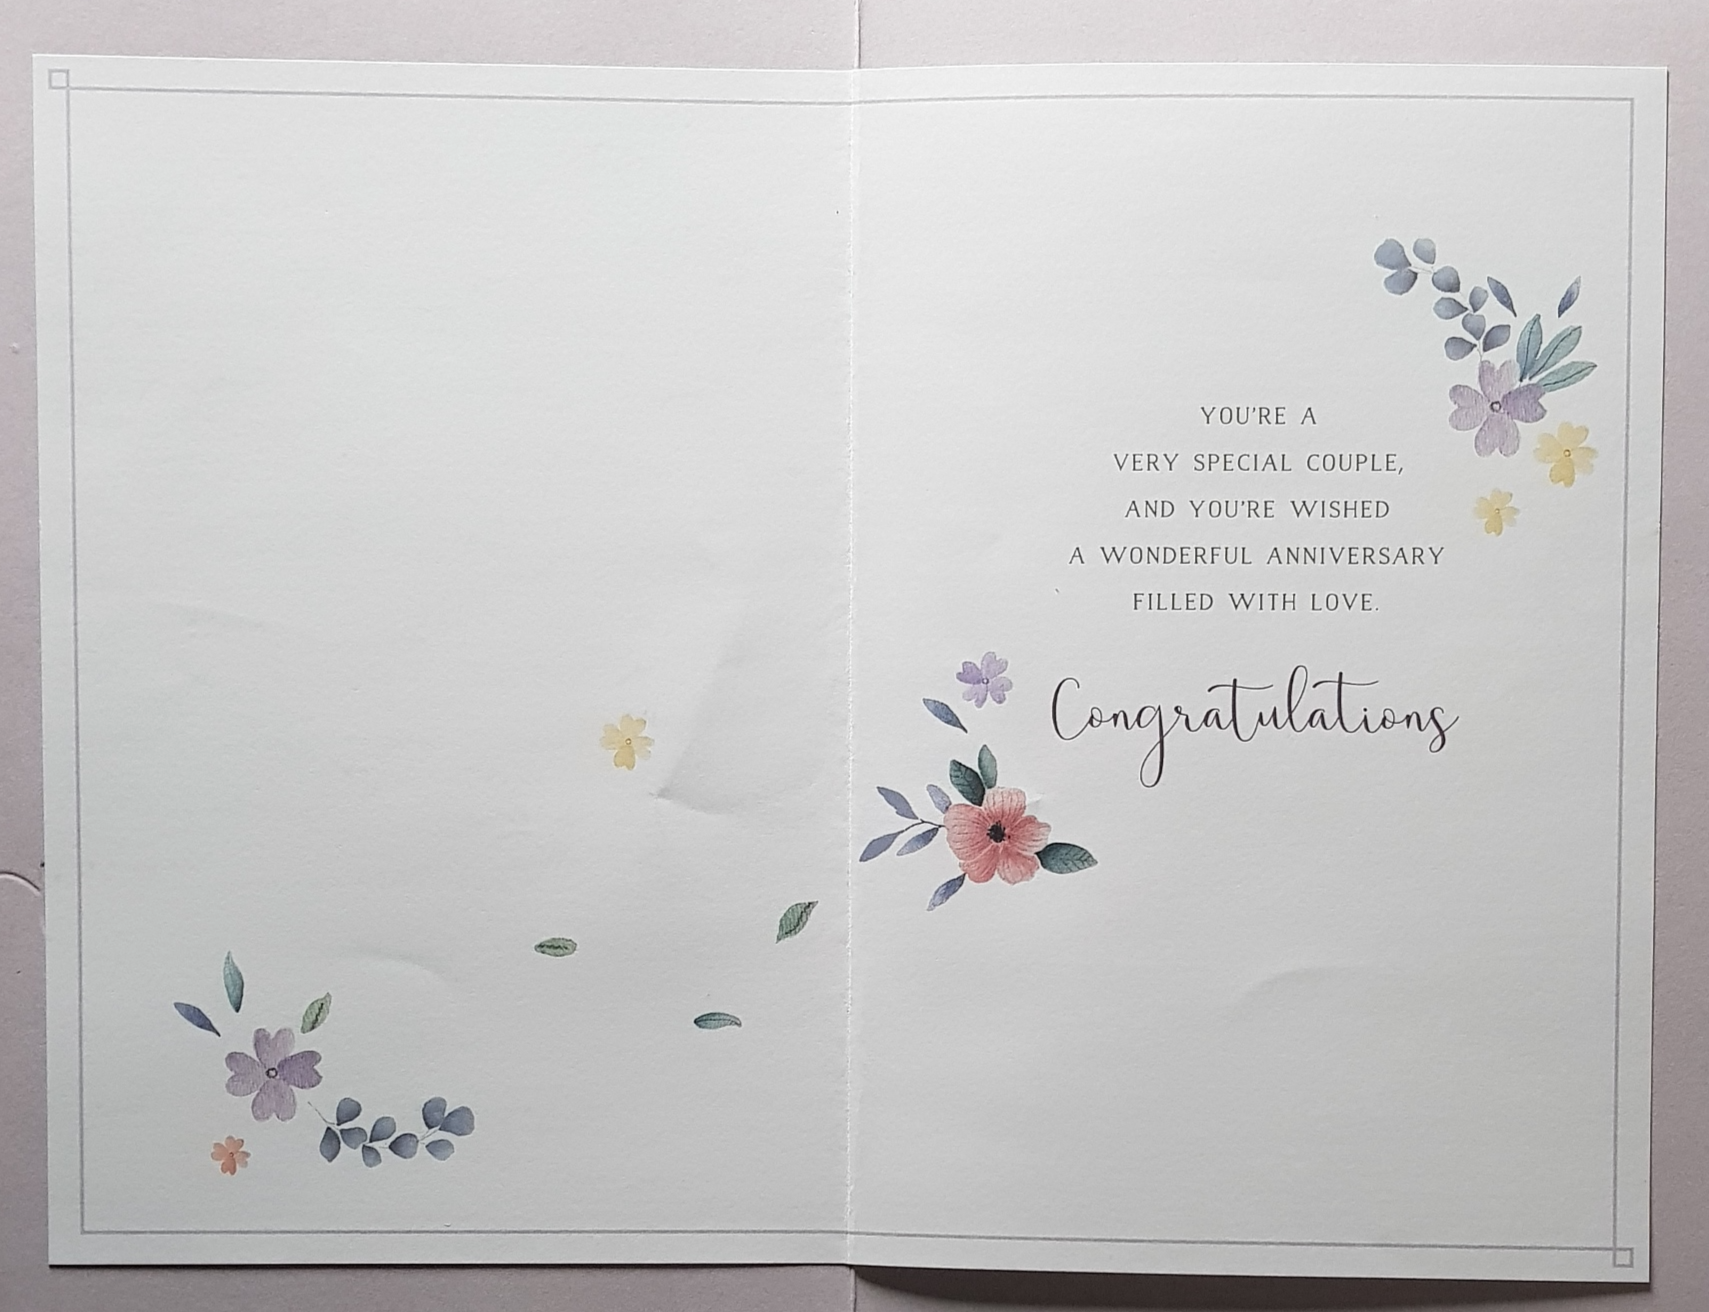 Anniversary Card - Brother & Sister-In-Law - A Pink & Purple Floral Heart & Love Birds